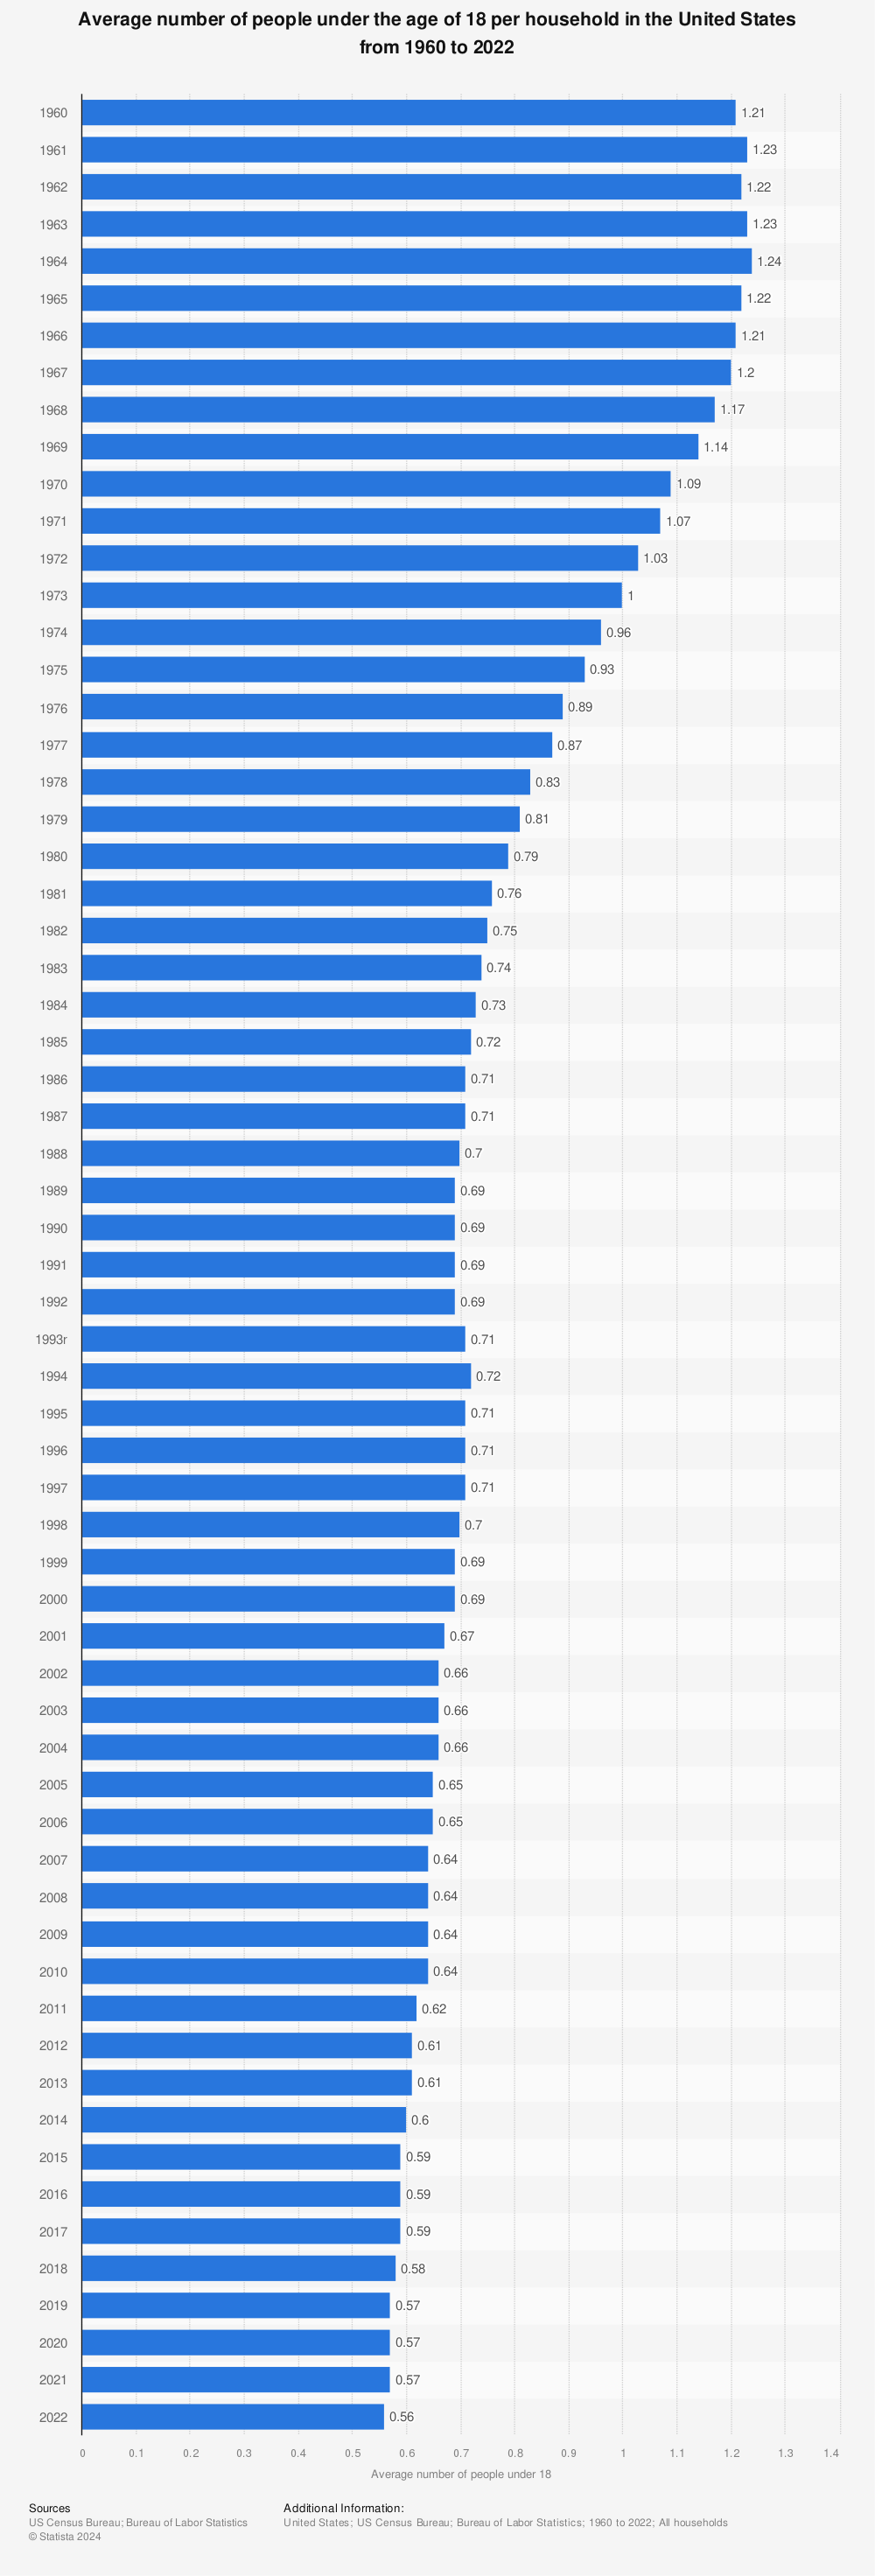 Statistic: Average number of people under the age of 18 per household in the United States from 1960 to 2020 | Statista